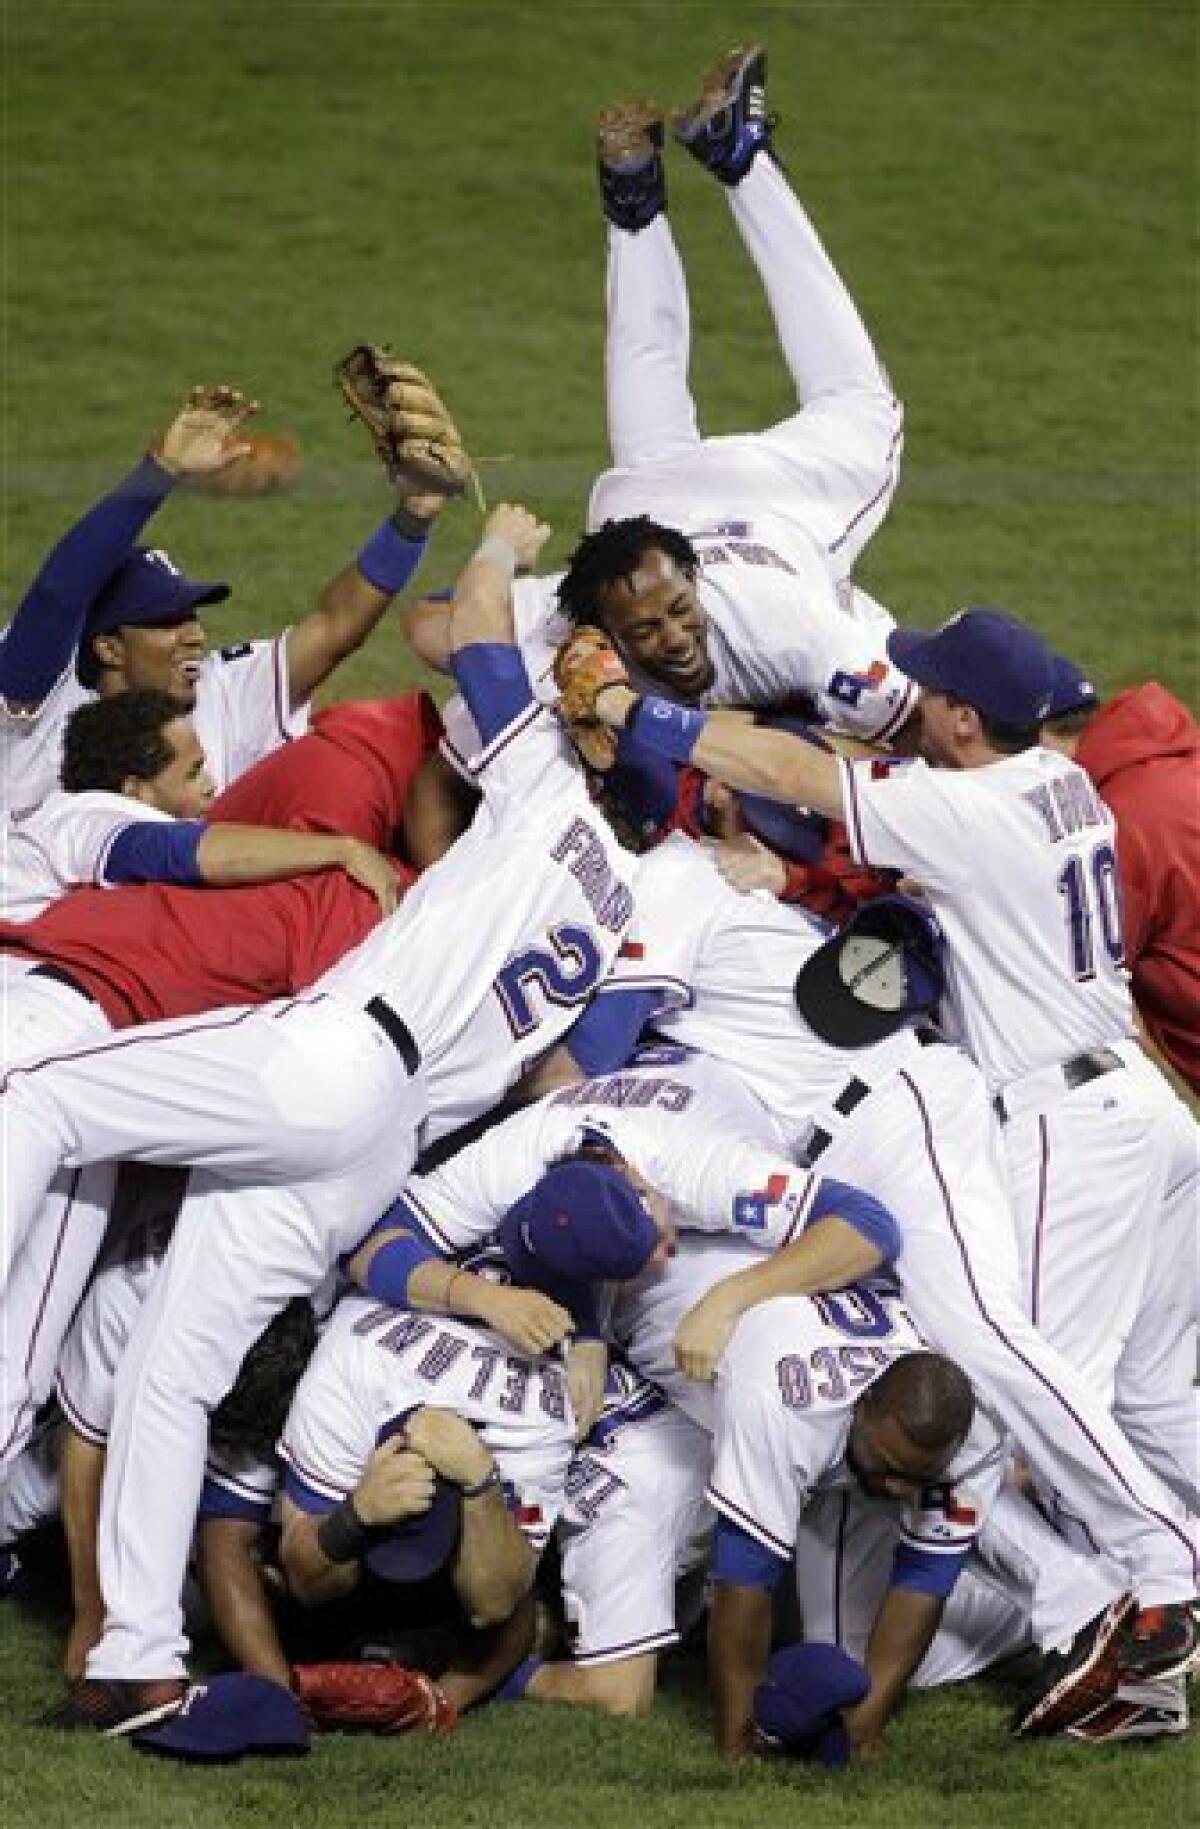 Rangers headed to World Series for first time - The San Diego Union-Tribune